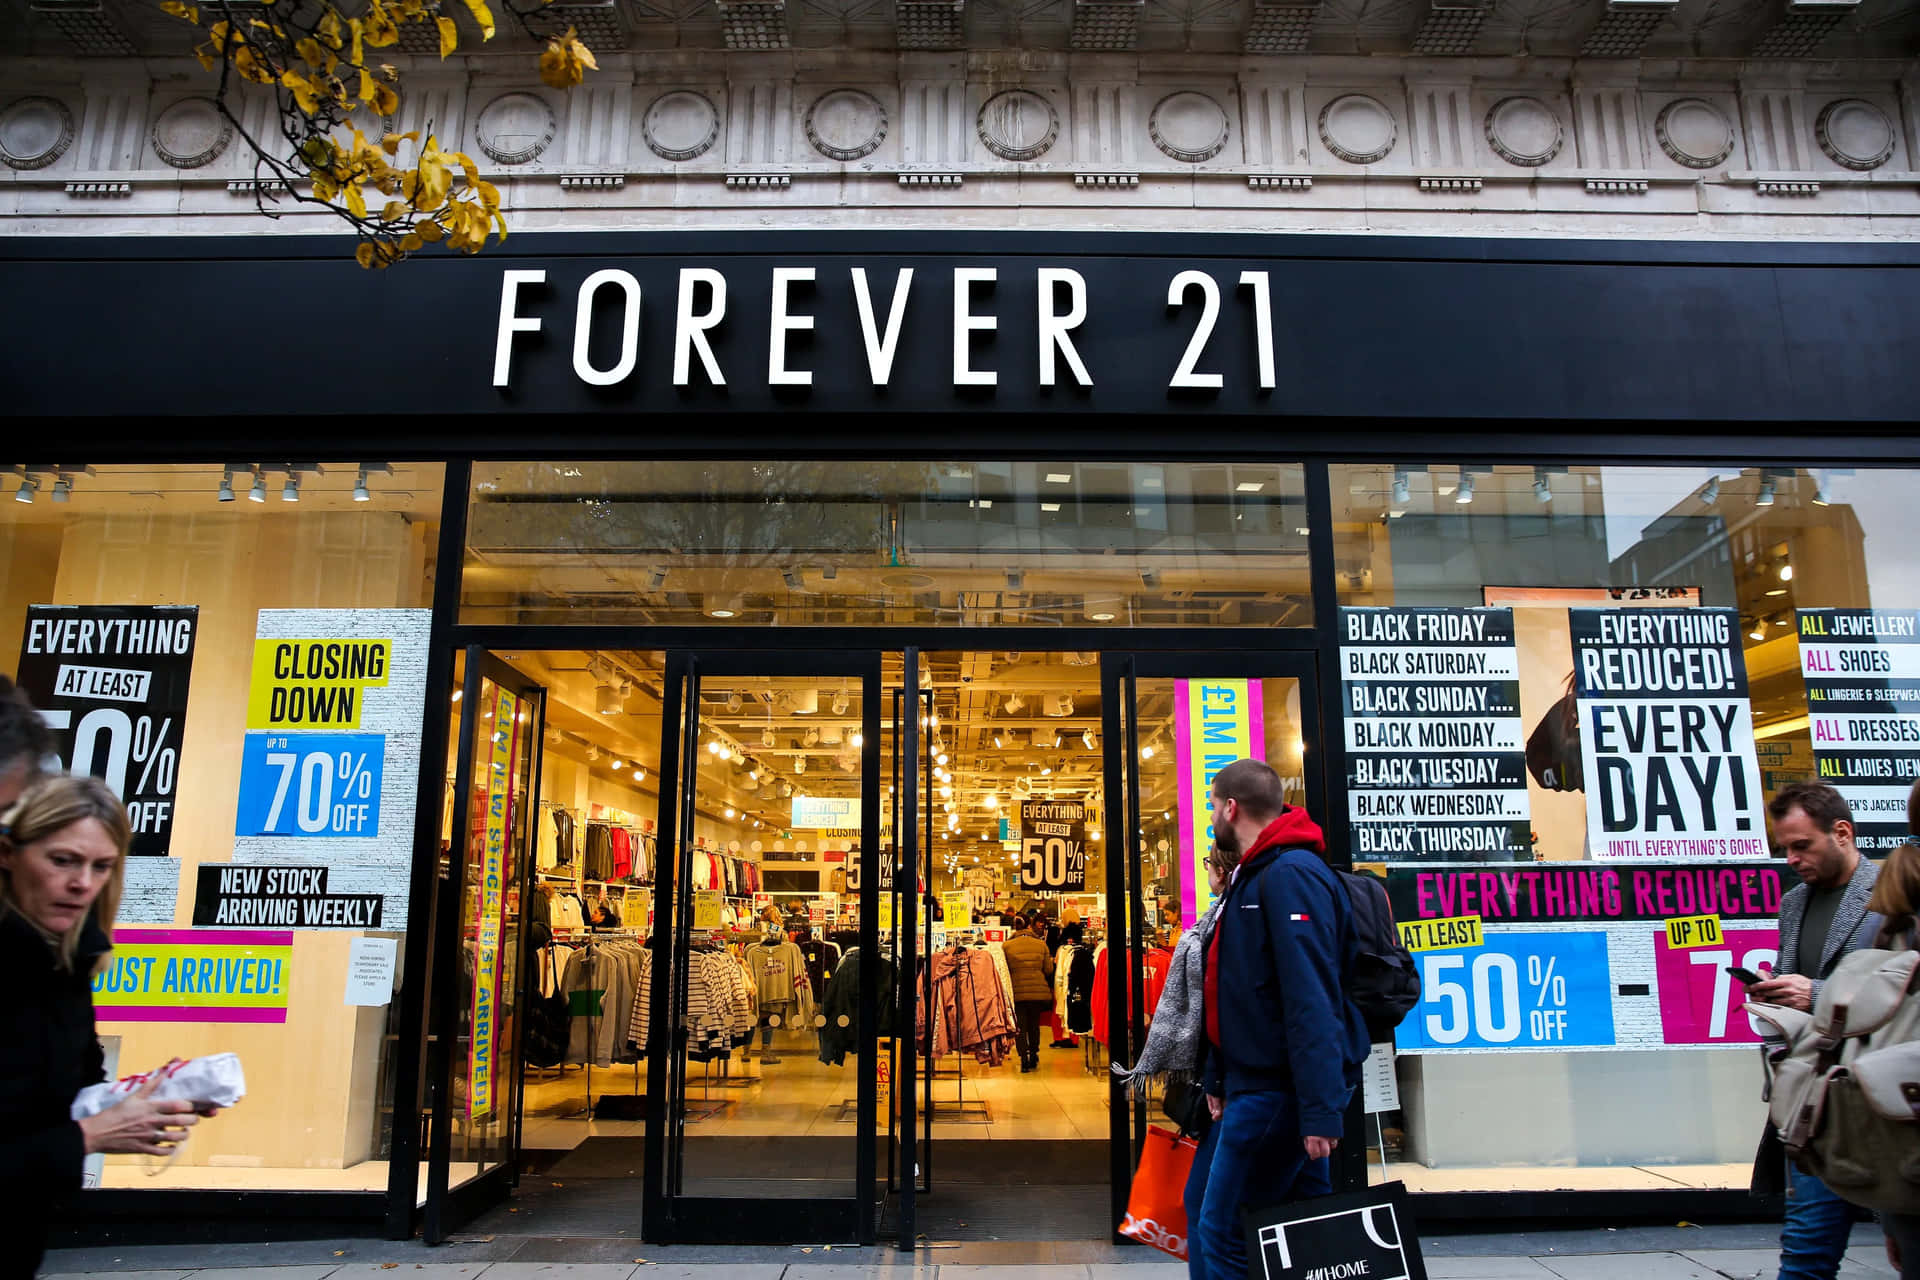 Build your wardrobe with stylish and affordable products from Forever 21